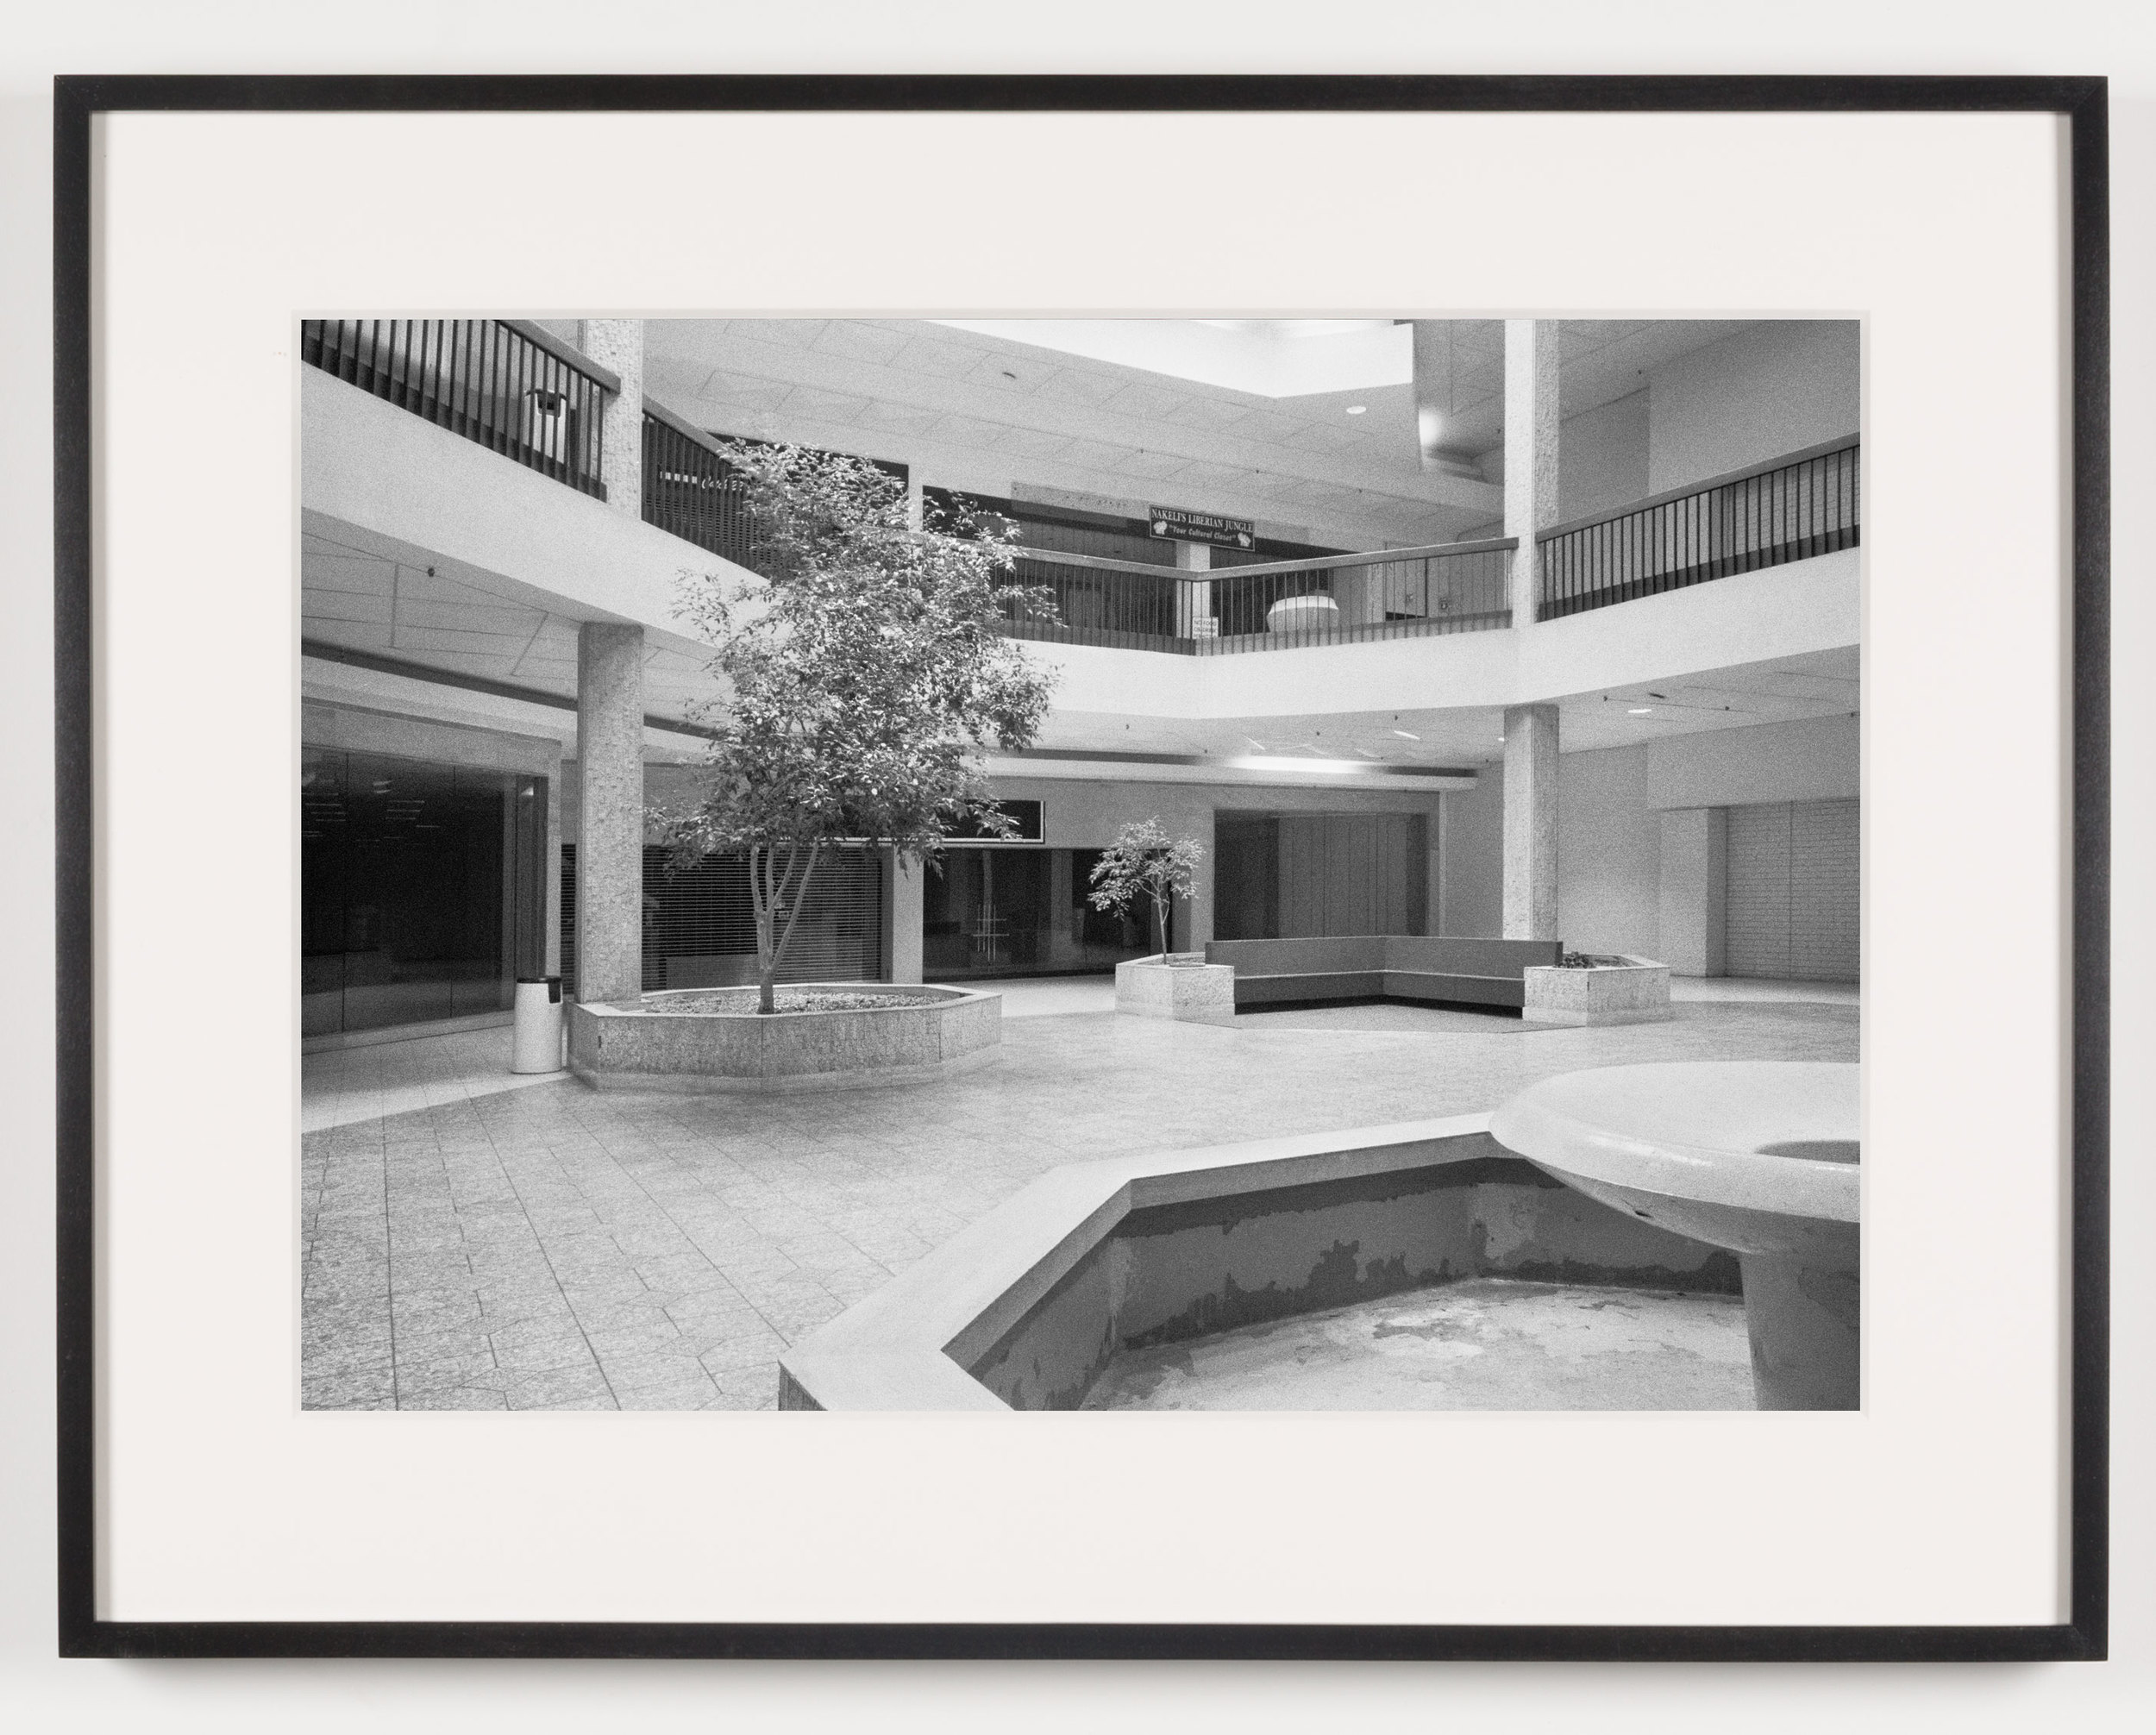   Randall Park Mall (View of Fountain, Seating Area), North Randall, OH, Est. 1976, Demo. 2014    2011   Epson Ultrachrome K3 archival ink jet print on Hahnemühle Photo Rag paper  21 5/8 x 28 1/8 inches  Exhibition:   A Diagram of Forces, 2011  